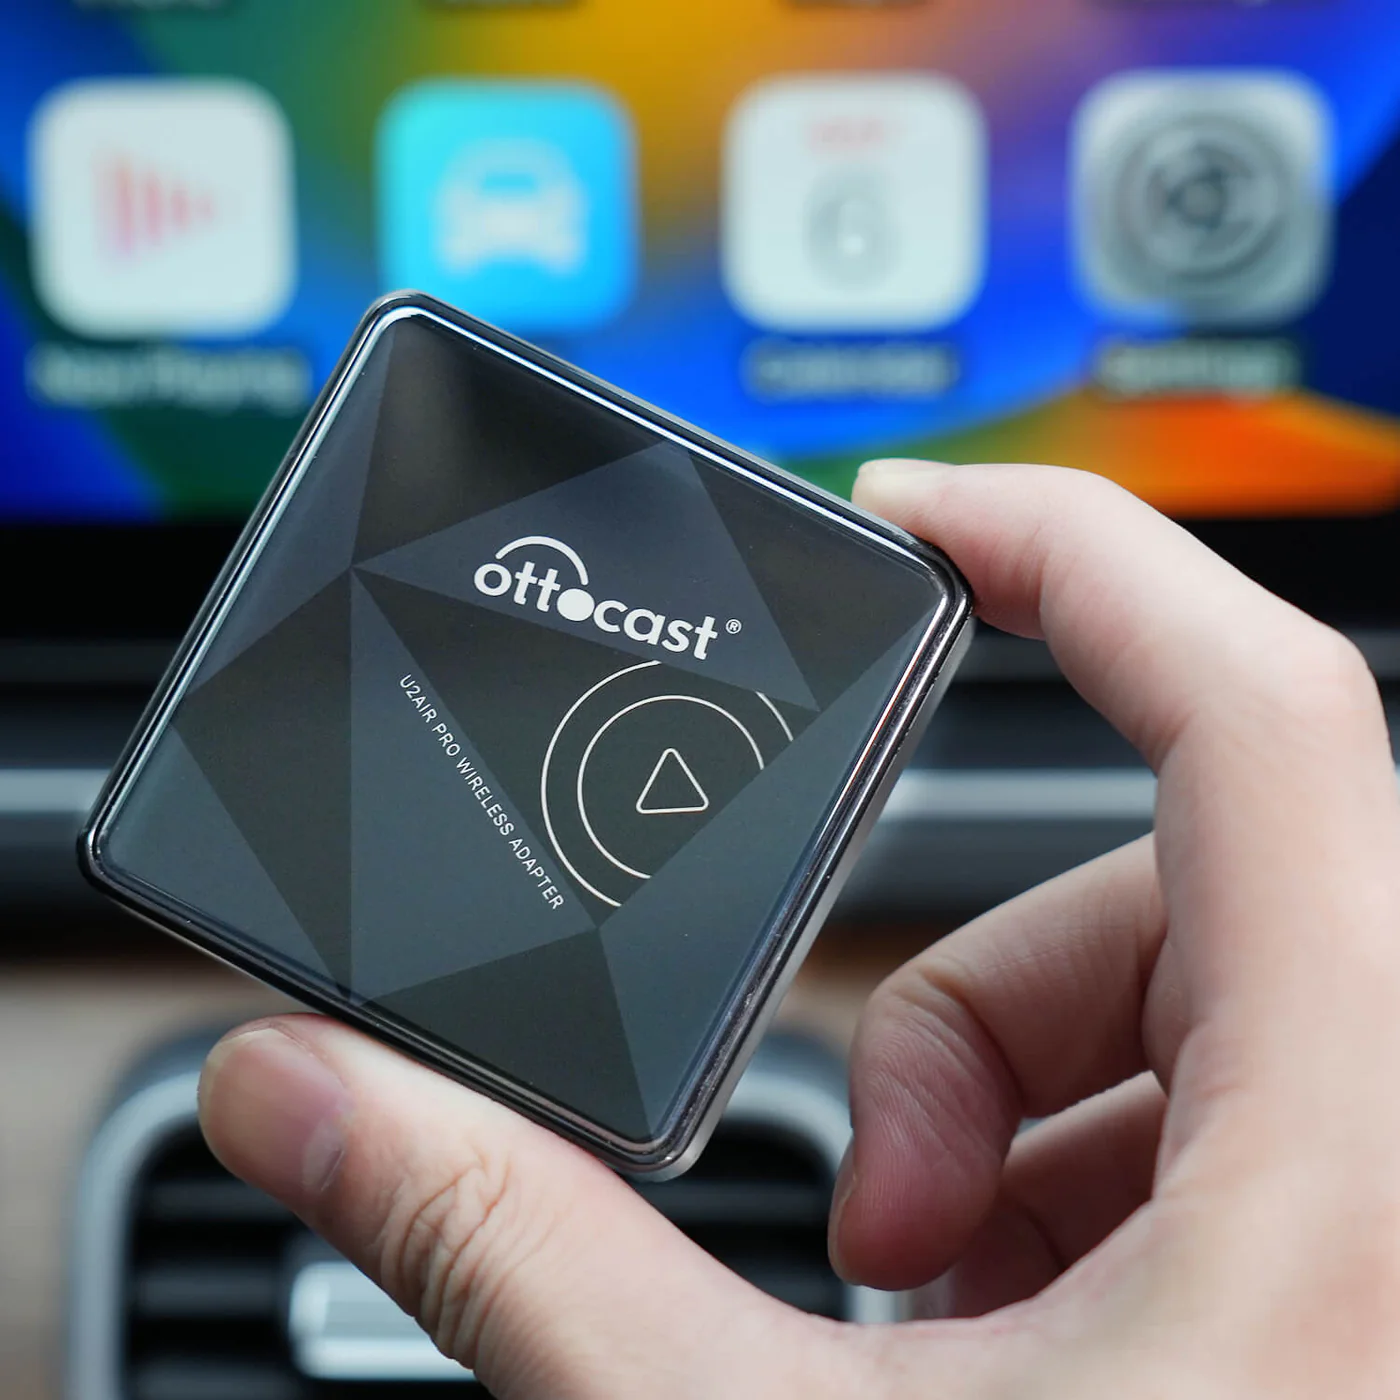 OTTO Cast Carplay AI BOX U2-PLUS Compatible With IPhone/Android, Other  Accessories